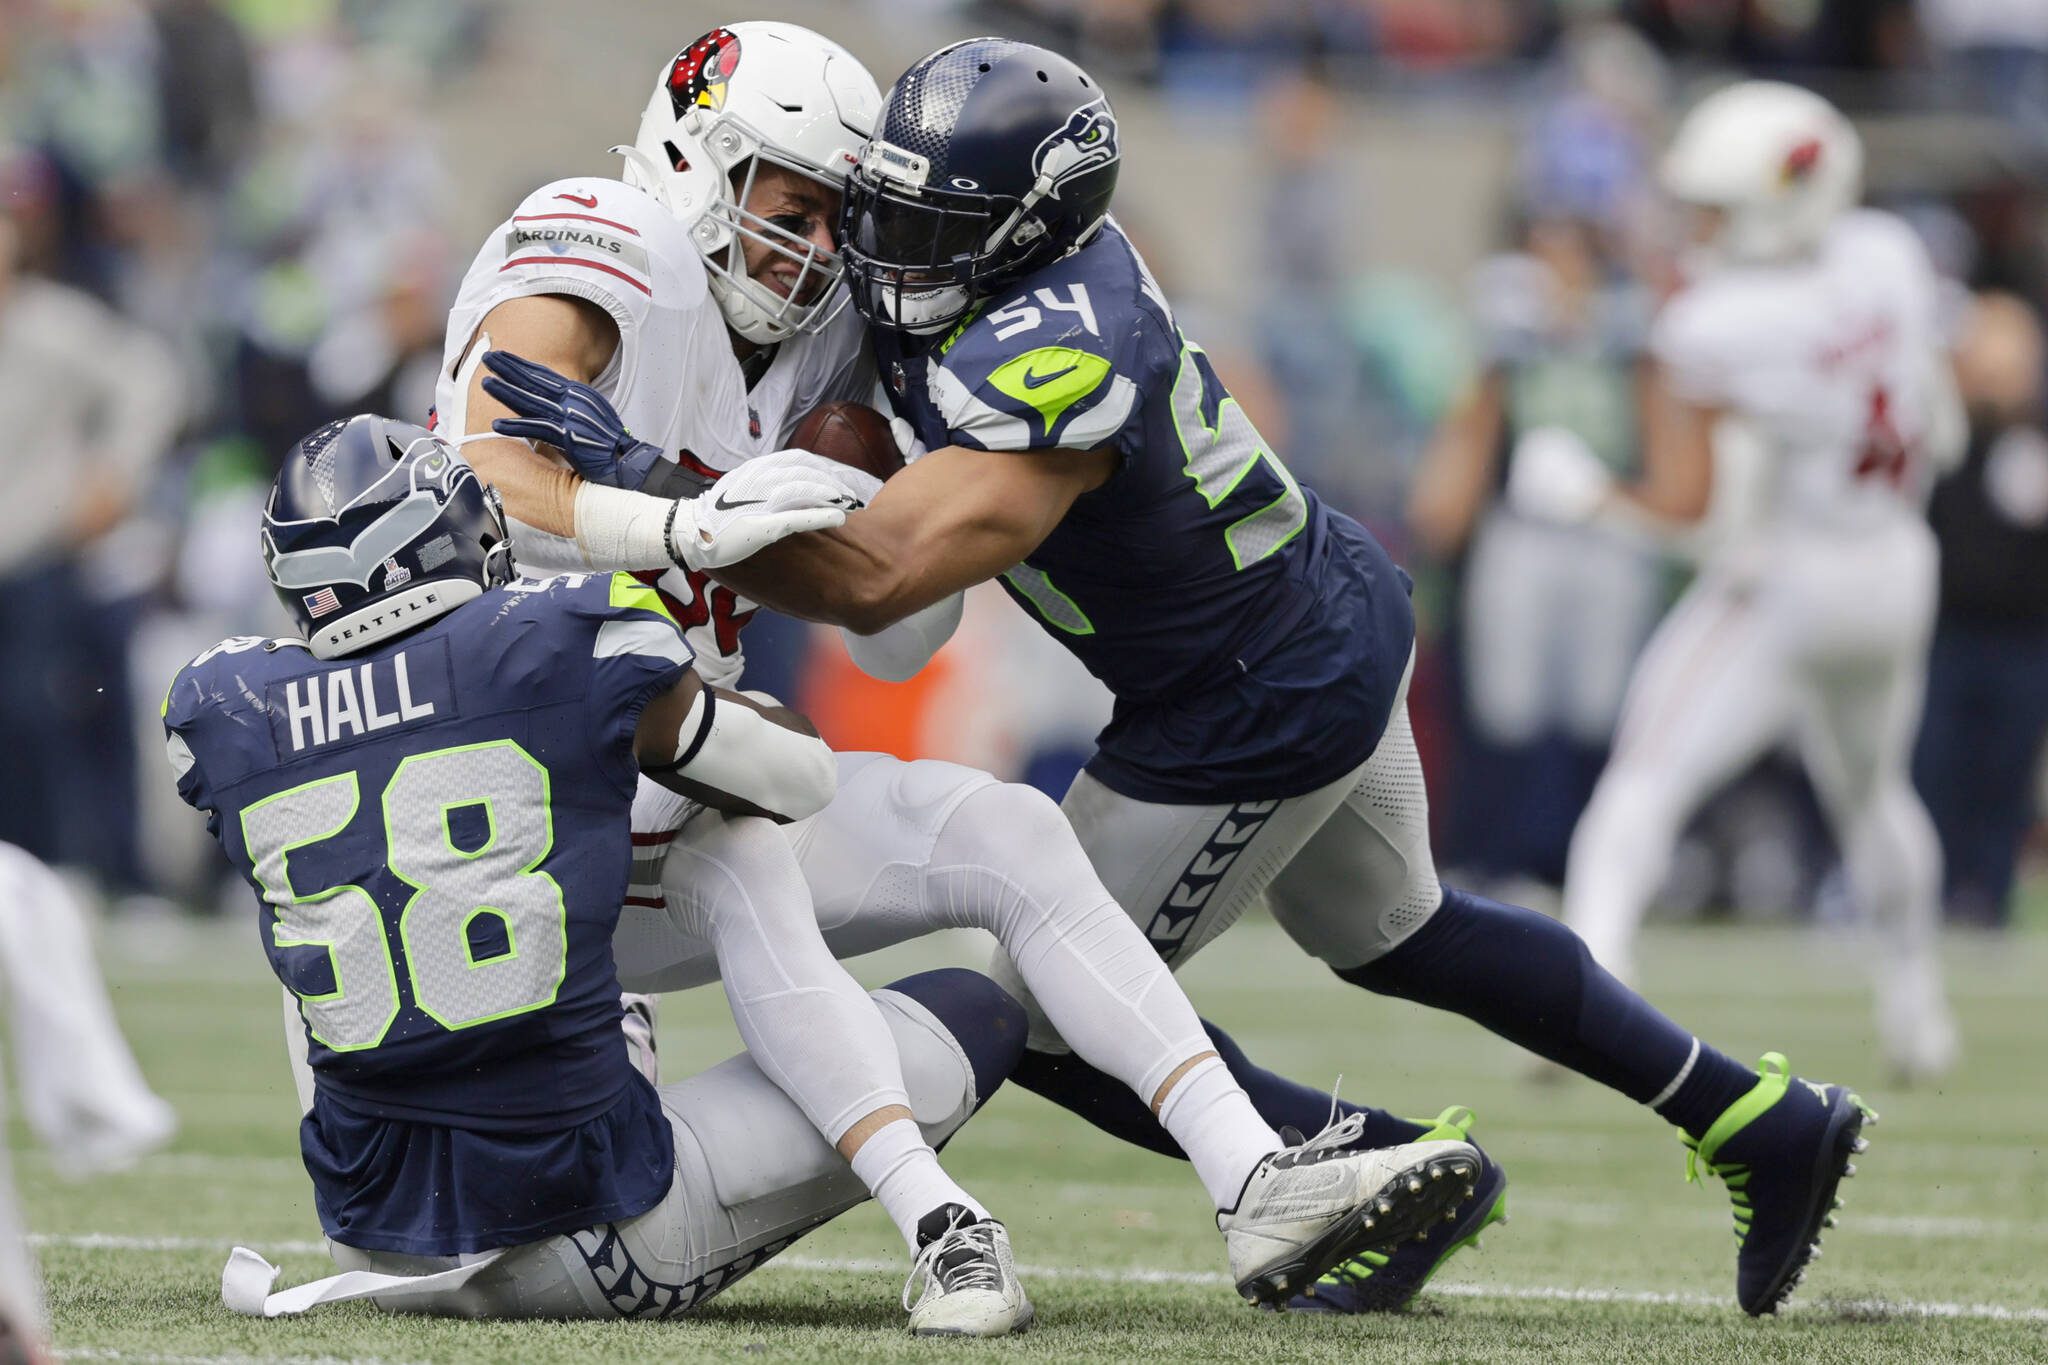 Arizona Cardinals tight end Zach Ertz, center, gets tackled by Seattle Seahawks linebackers Bobby Wagner (54) and Derick Hall (58) during the second half of Sunday’s game in Seattle. (AP Photo/John Froschauer)